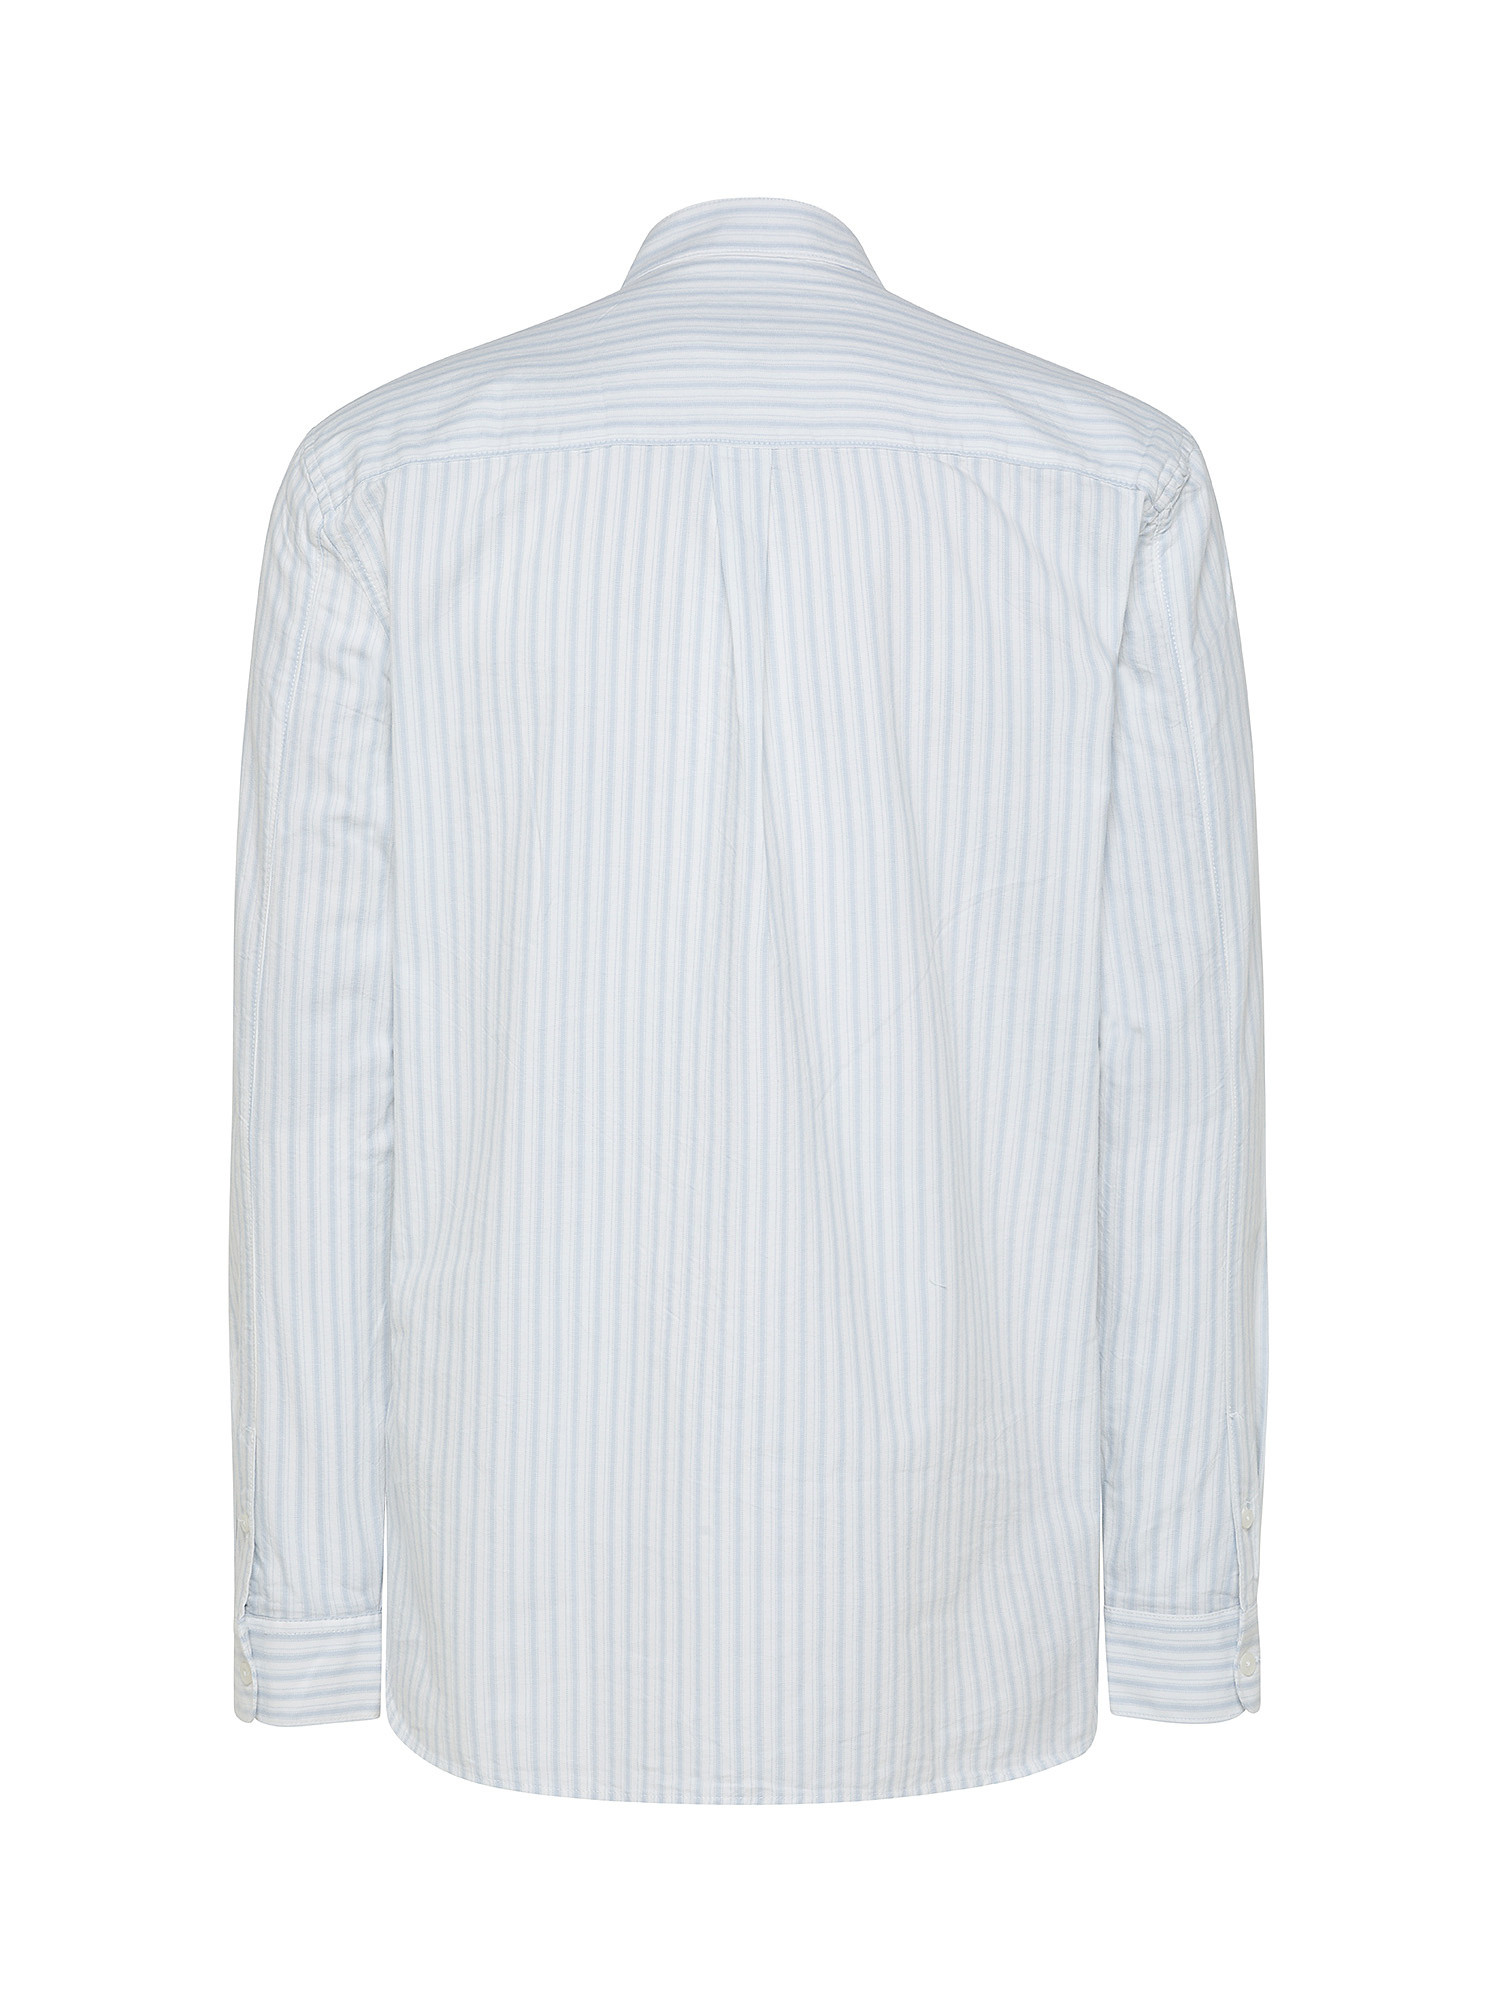 Pepe Jeans - Regular fit striped shirt, White, large image number 2